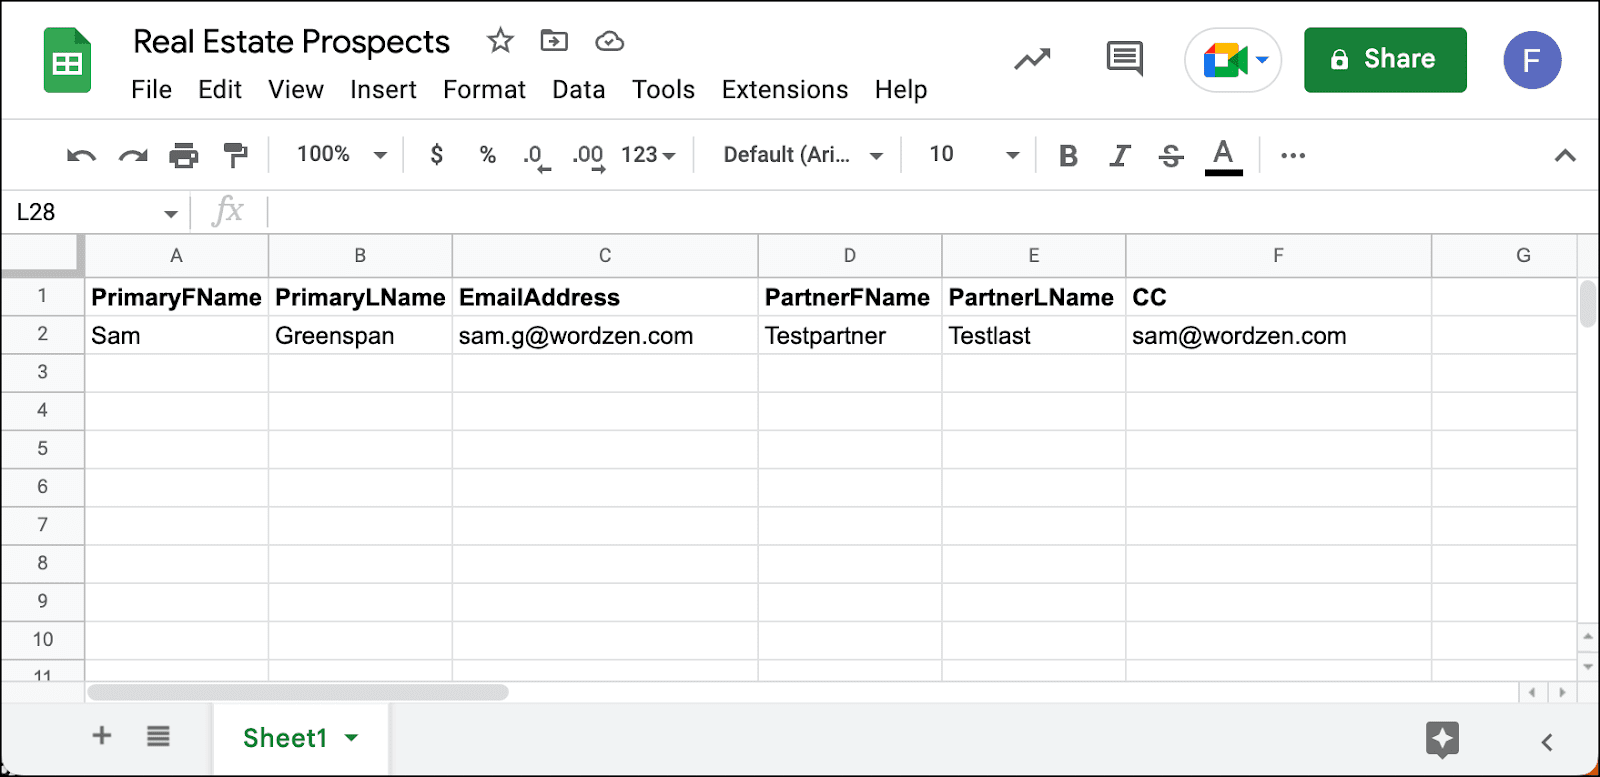 Set up a Google Sheet with your real estate email automations prospects